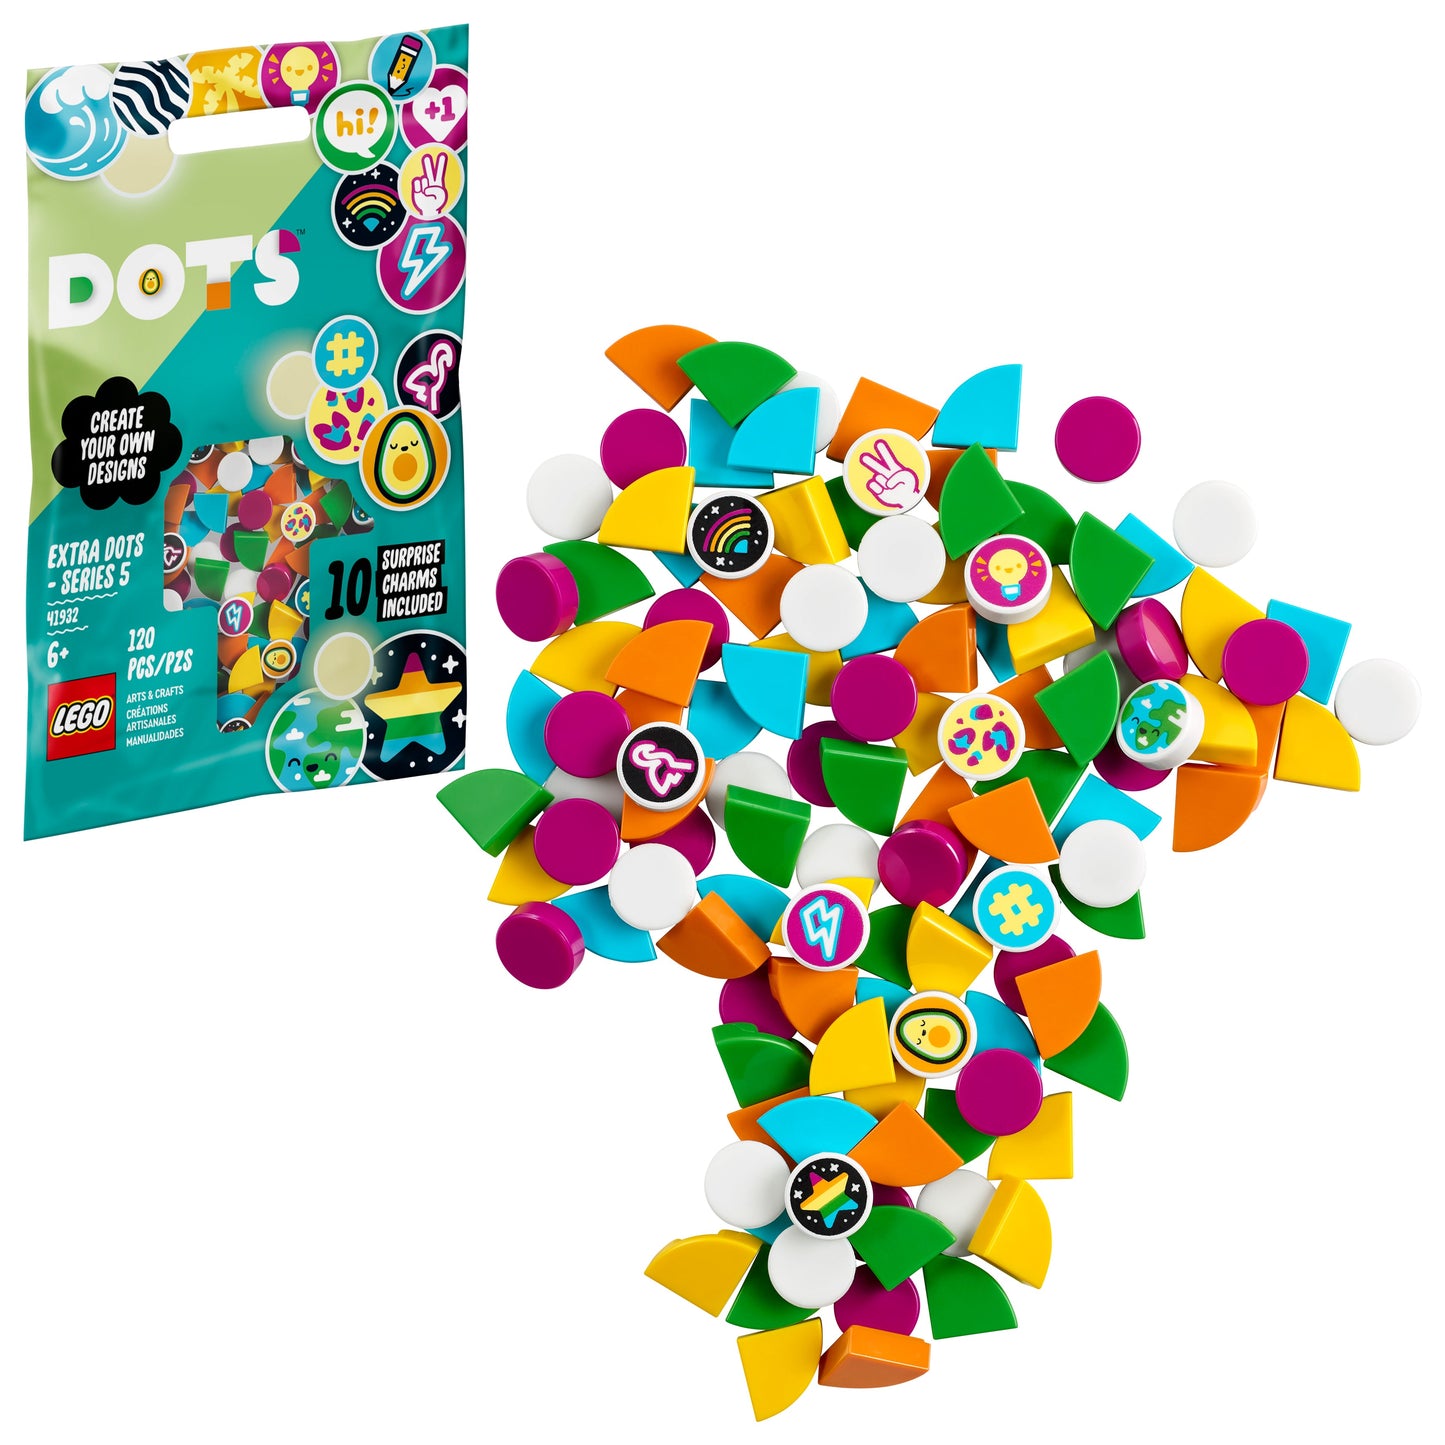 41932 Extra DOTS - Series 5 (Retired) LEGO DOTS